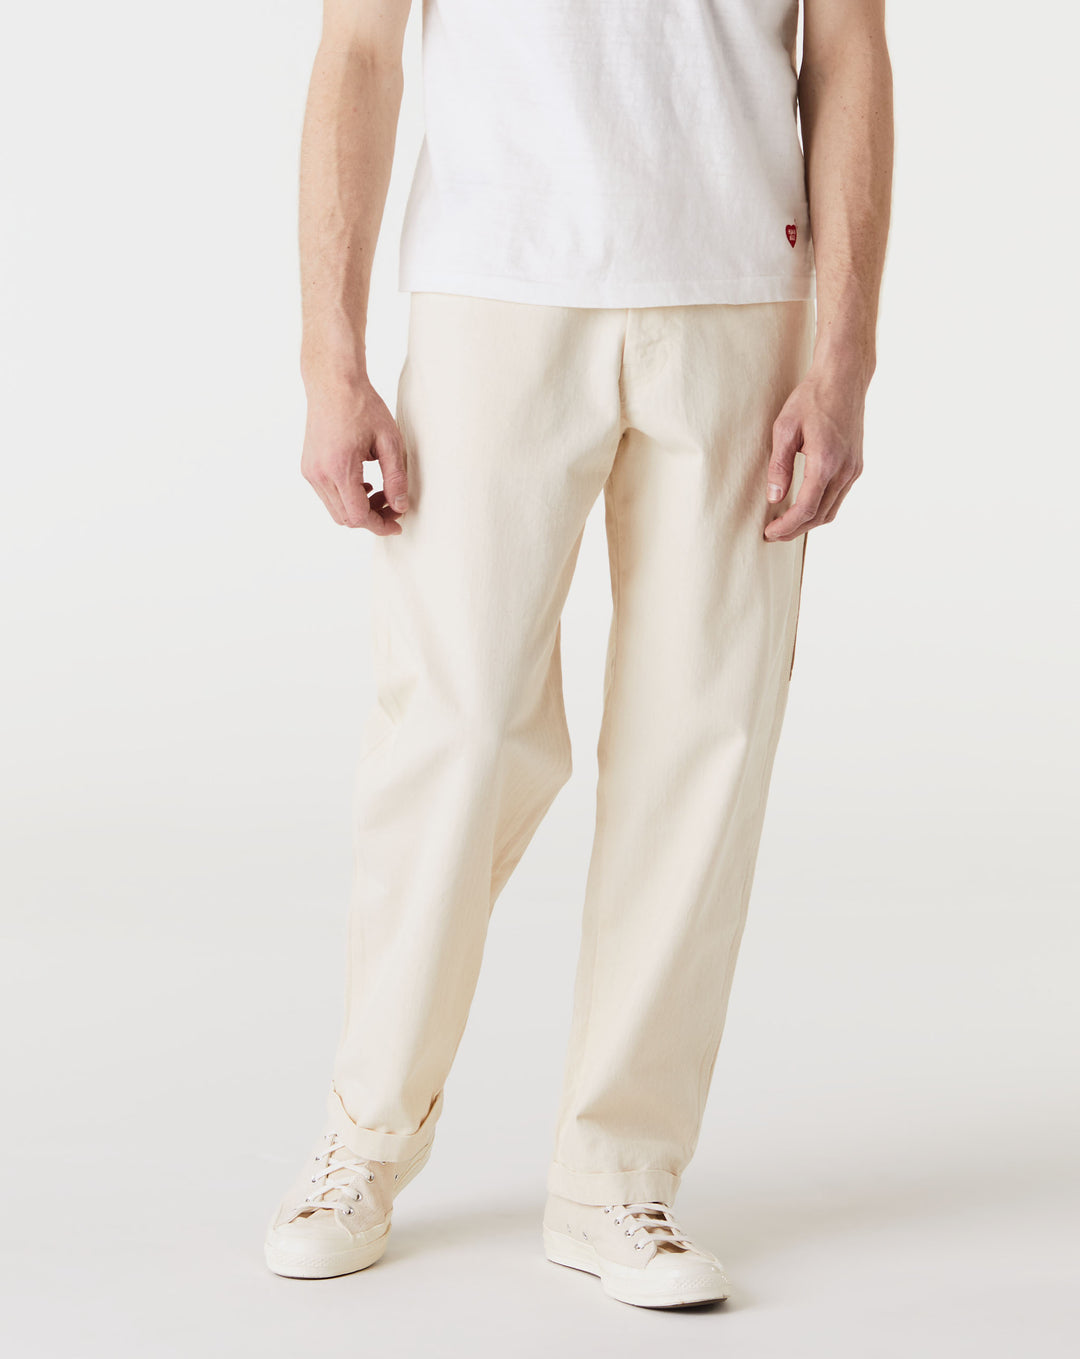 Preview Tailored Drawcord Pants